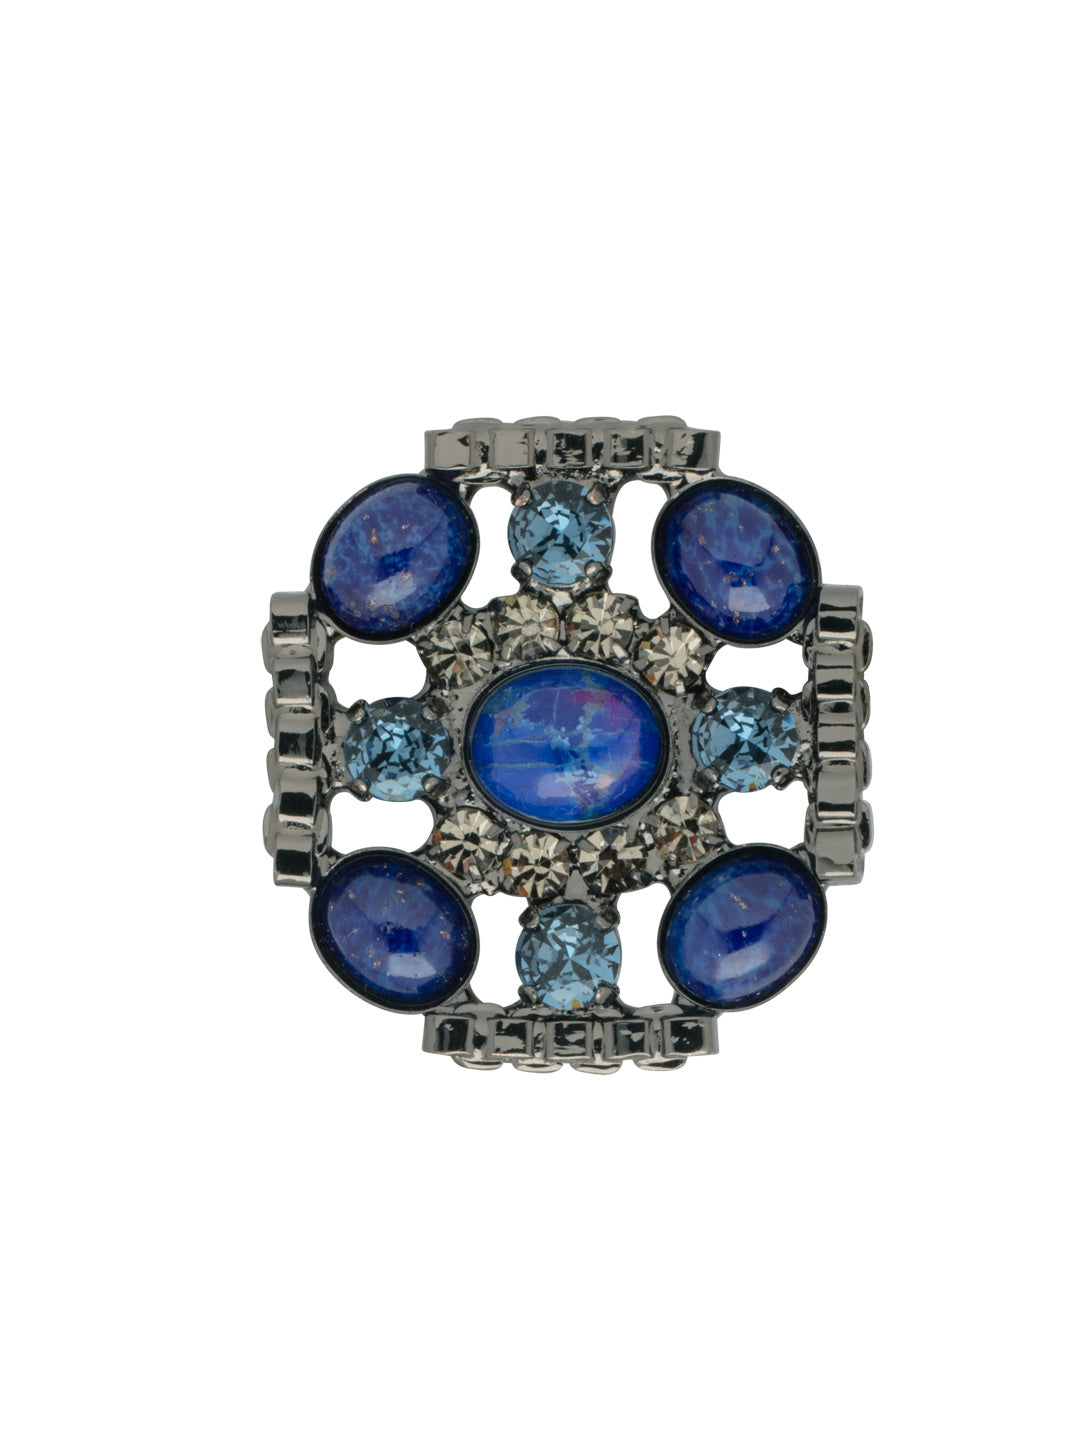 Lapis Statement Pin - 4PFL20GMIND - <p>The Lapis Statement Pin features crystals and semi-precious stones in a mandala style with a pin backing. From Sorrelli's Industrial collection in our Gun Metal finish.</p>